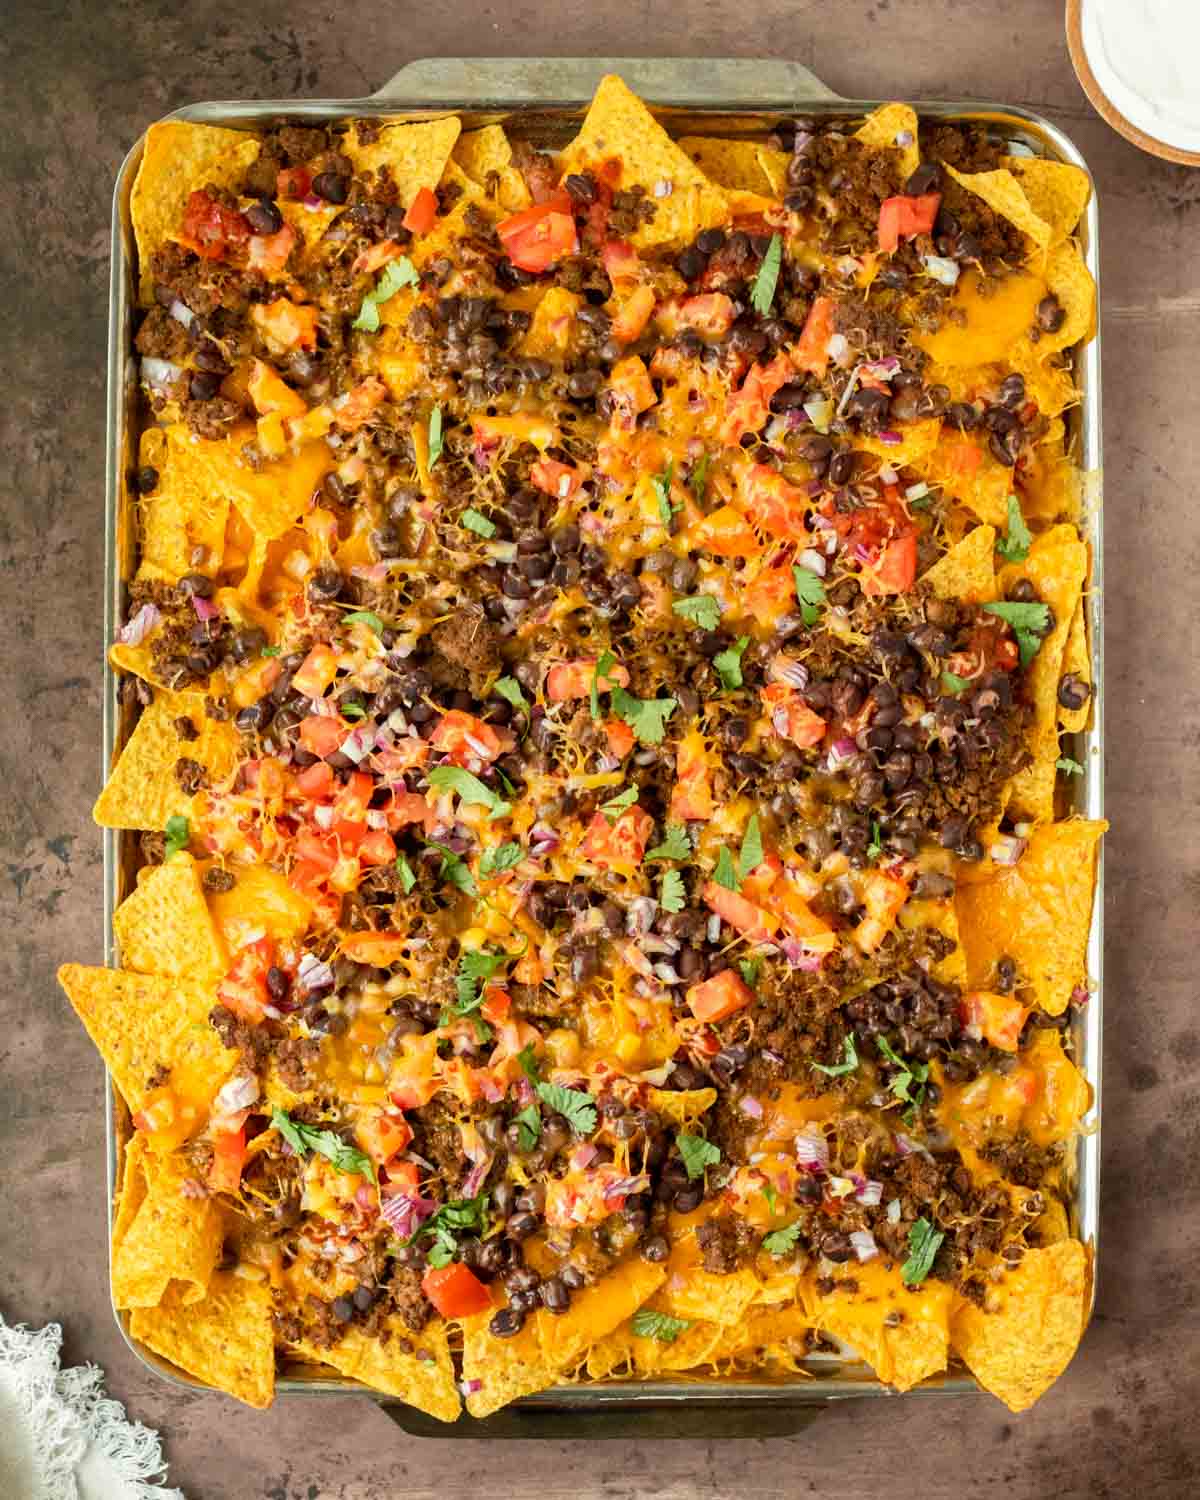 These sheet pan nachos are an easy appetizer recipe made with pantry-staple ingredients for a quick and flavorful crowd-pleaser dish. This recipe can be served for a game day appetizer but is also a great quick weeknight meal.